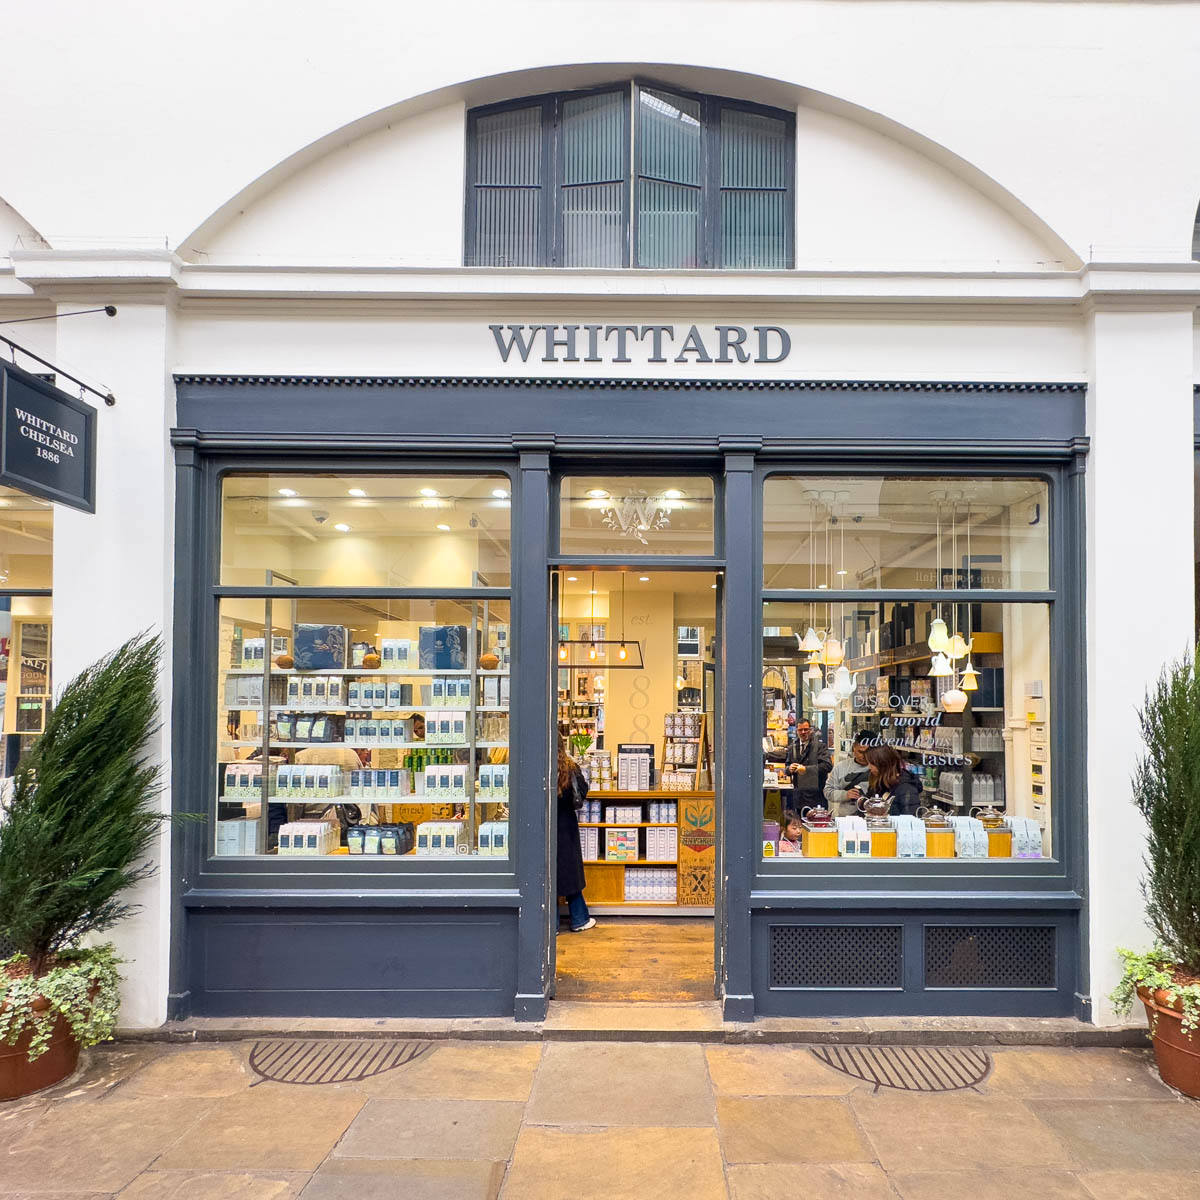 The outside of the Whittard tea shop in Covent Garden